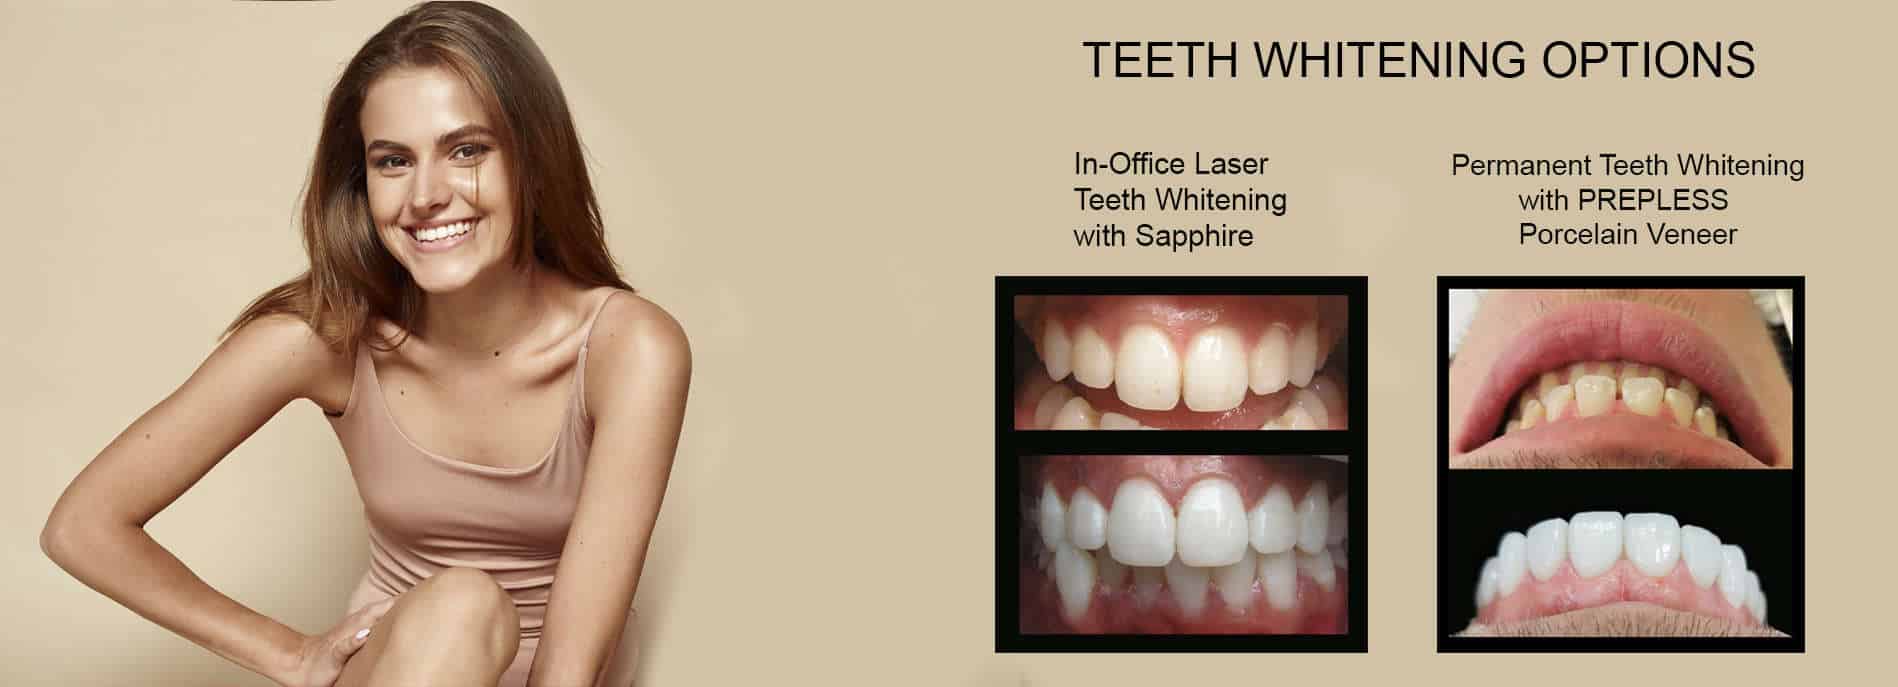 General & Cosmetic Dentist Melbourne - Before and After Smile Makeover Melbourne